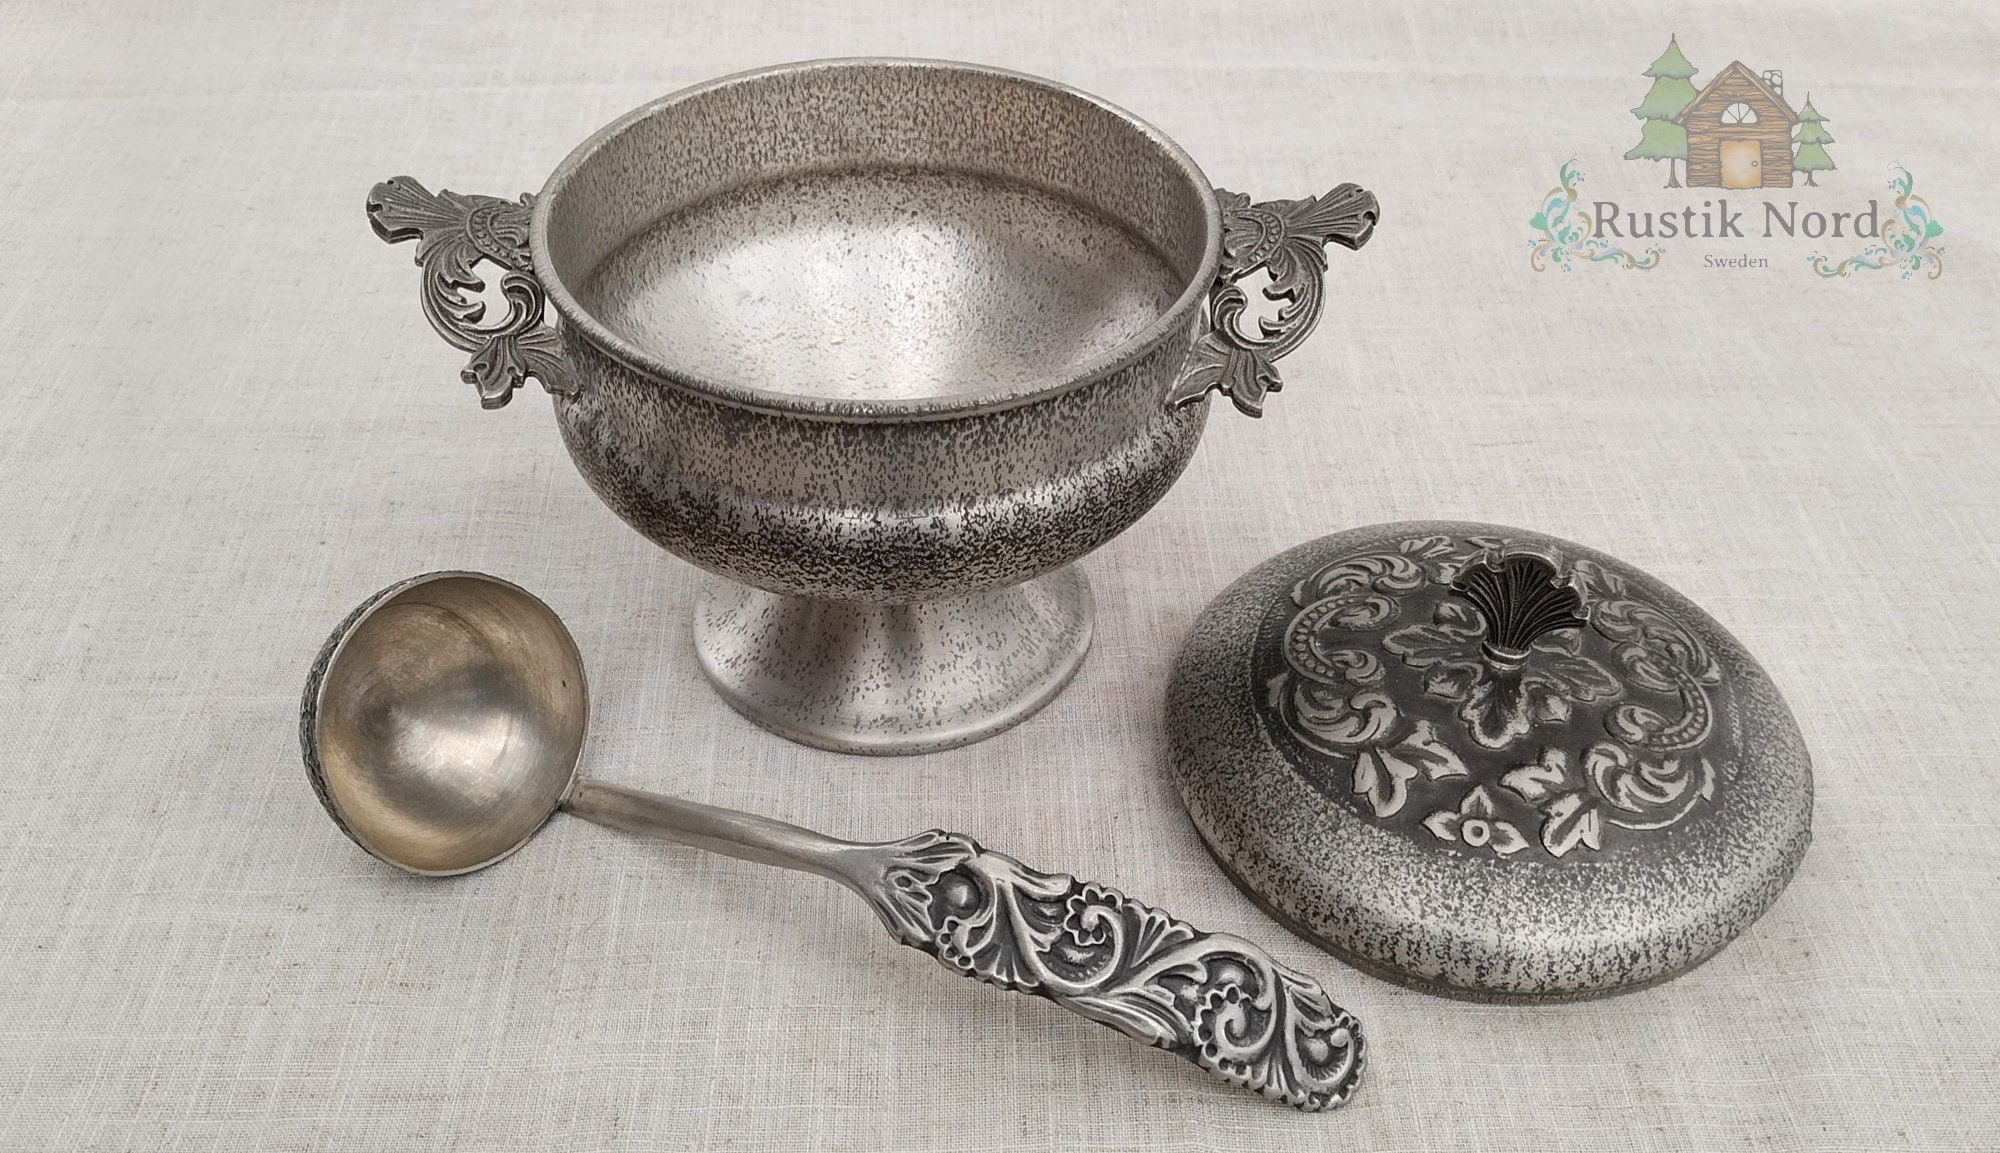 Large Mixing Bowl in Polished Pewter by Warwick Miniatures